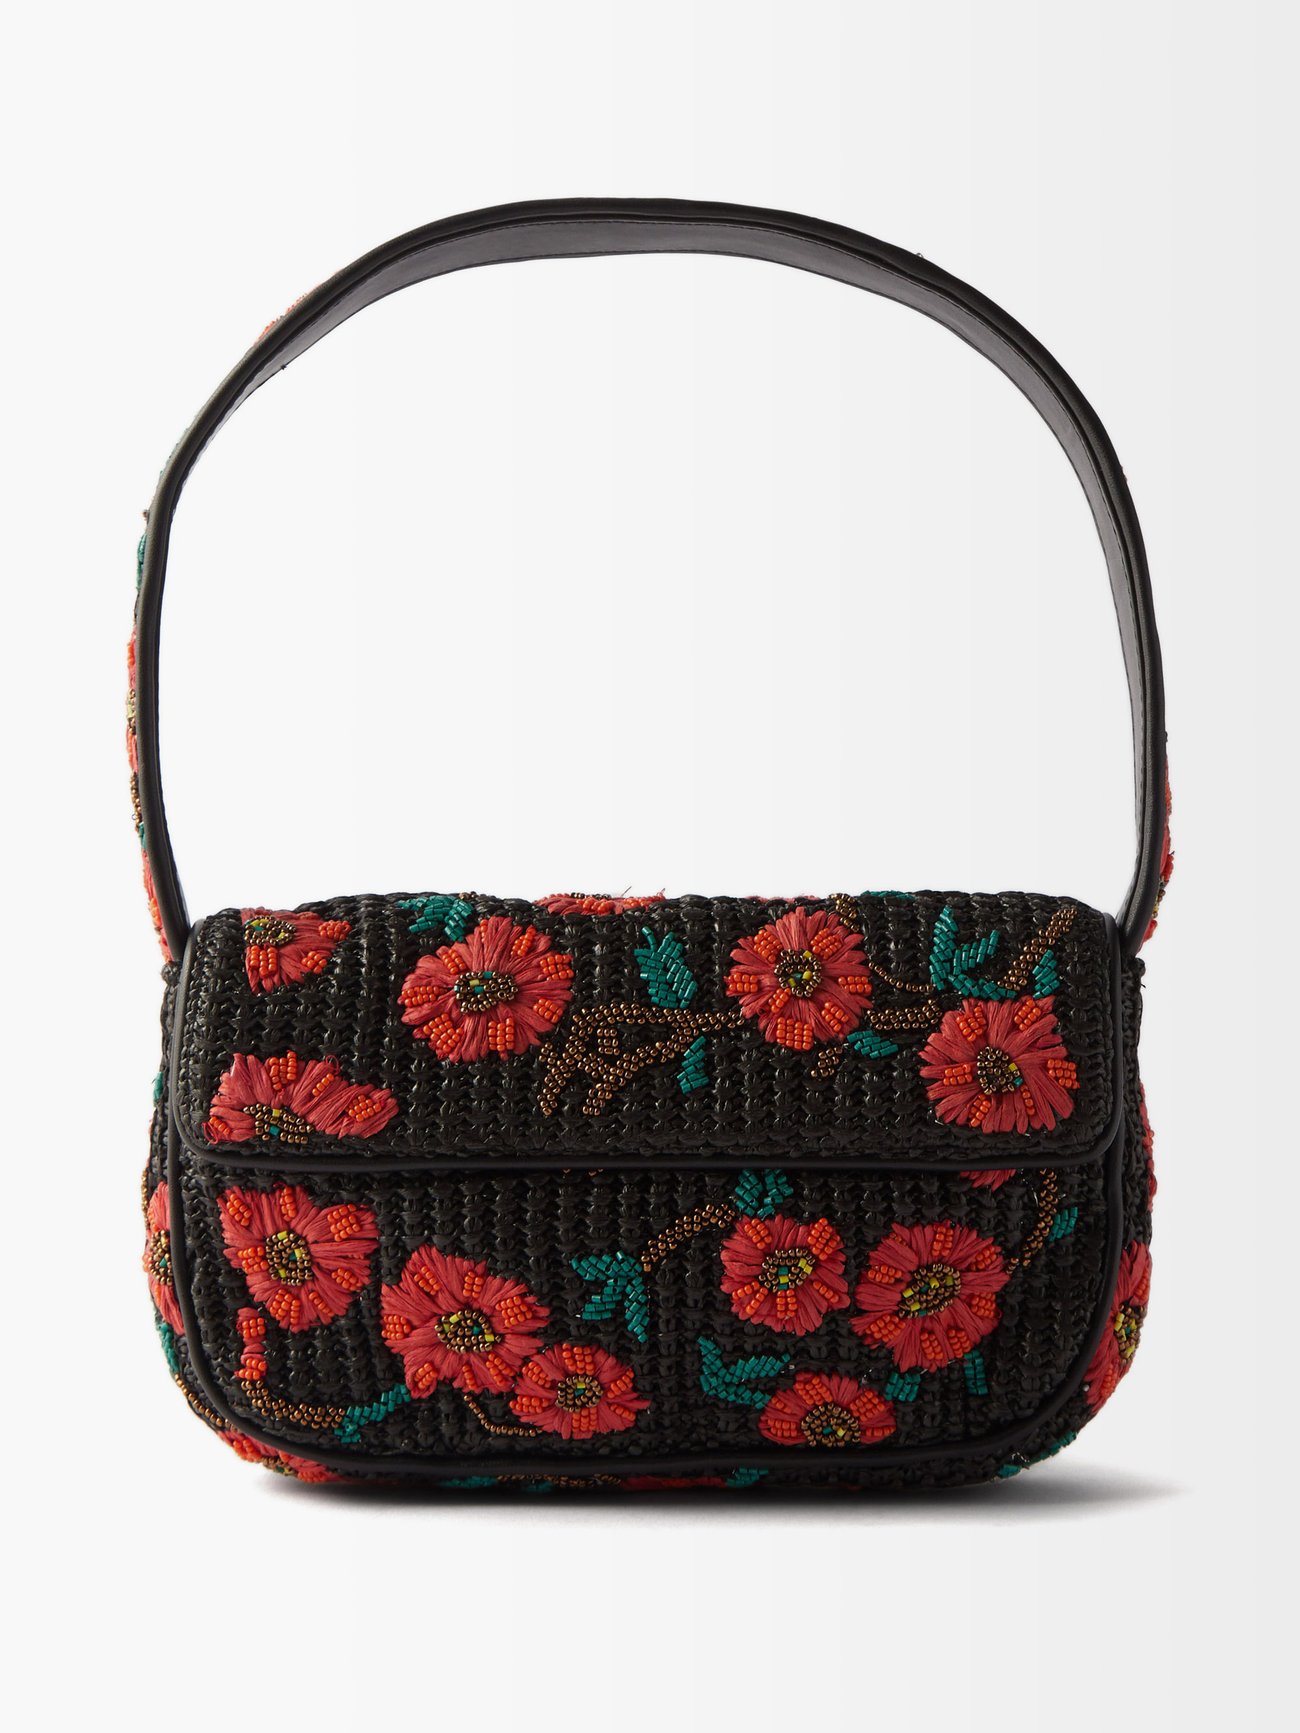 Staud’s black Tommy bag is constructed from woven raffia and handbeaded with red floral motifs, shaped with a short shoulder strap and magnetic flap.